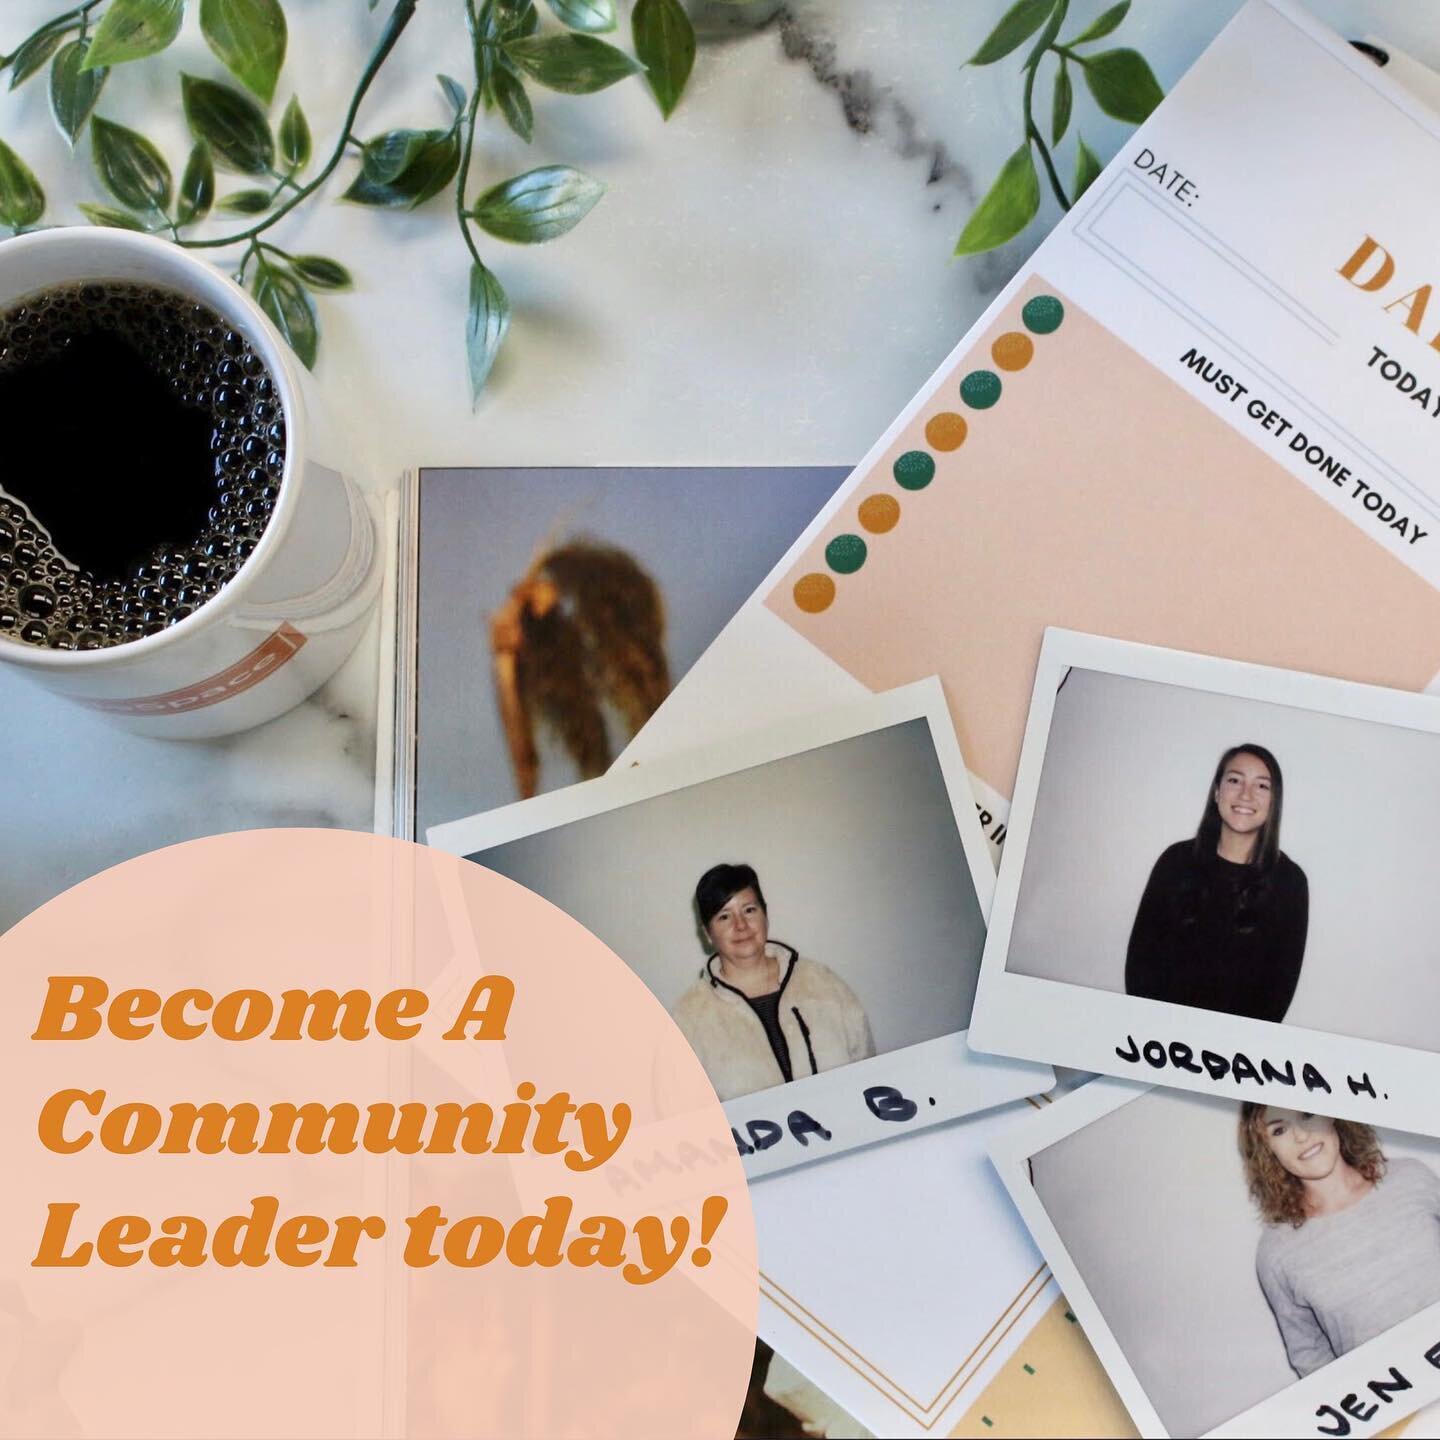 We need community leaders! Come join our community and connect with like-minded individuals at our highest tier of membership through our volunteer program🧡

Send inquiries to info@tablespace.ca

#community